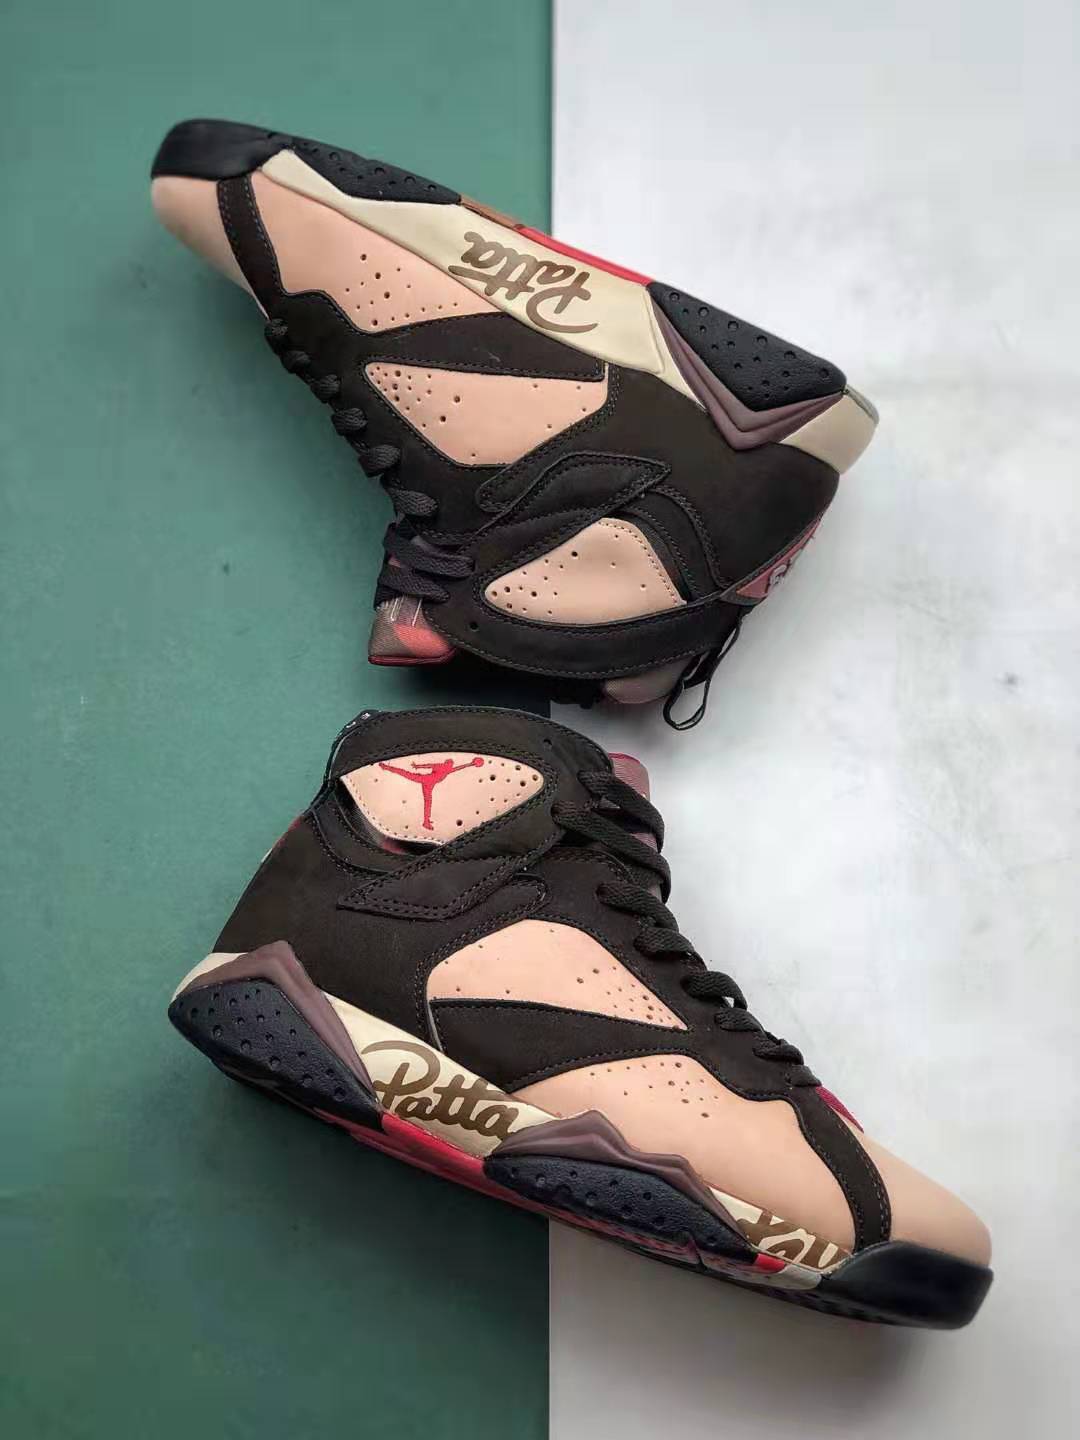 Patta x Air Jordan 7 Retro OG SP 'Shimmer' AT3375-200 - Exclusive Collaboration Release